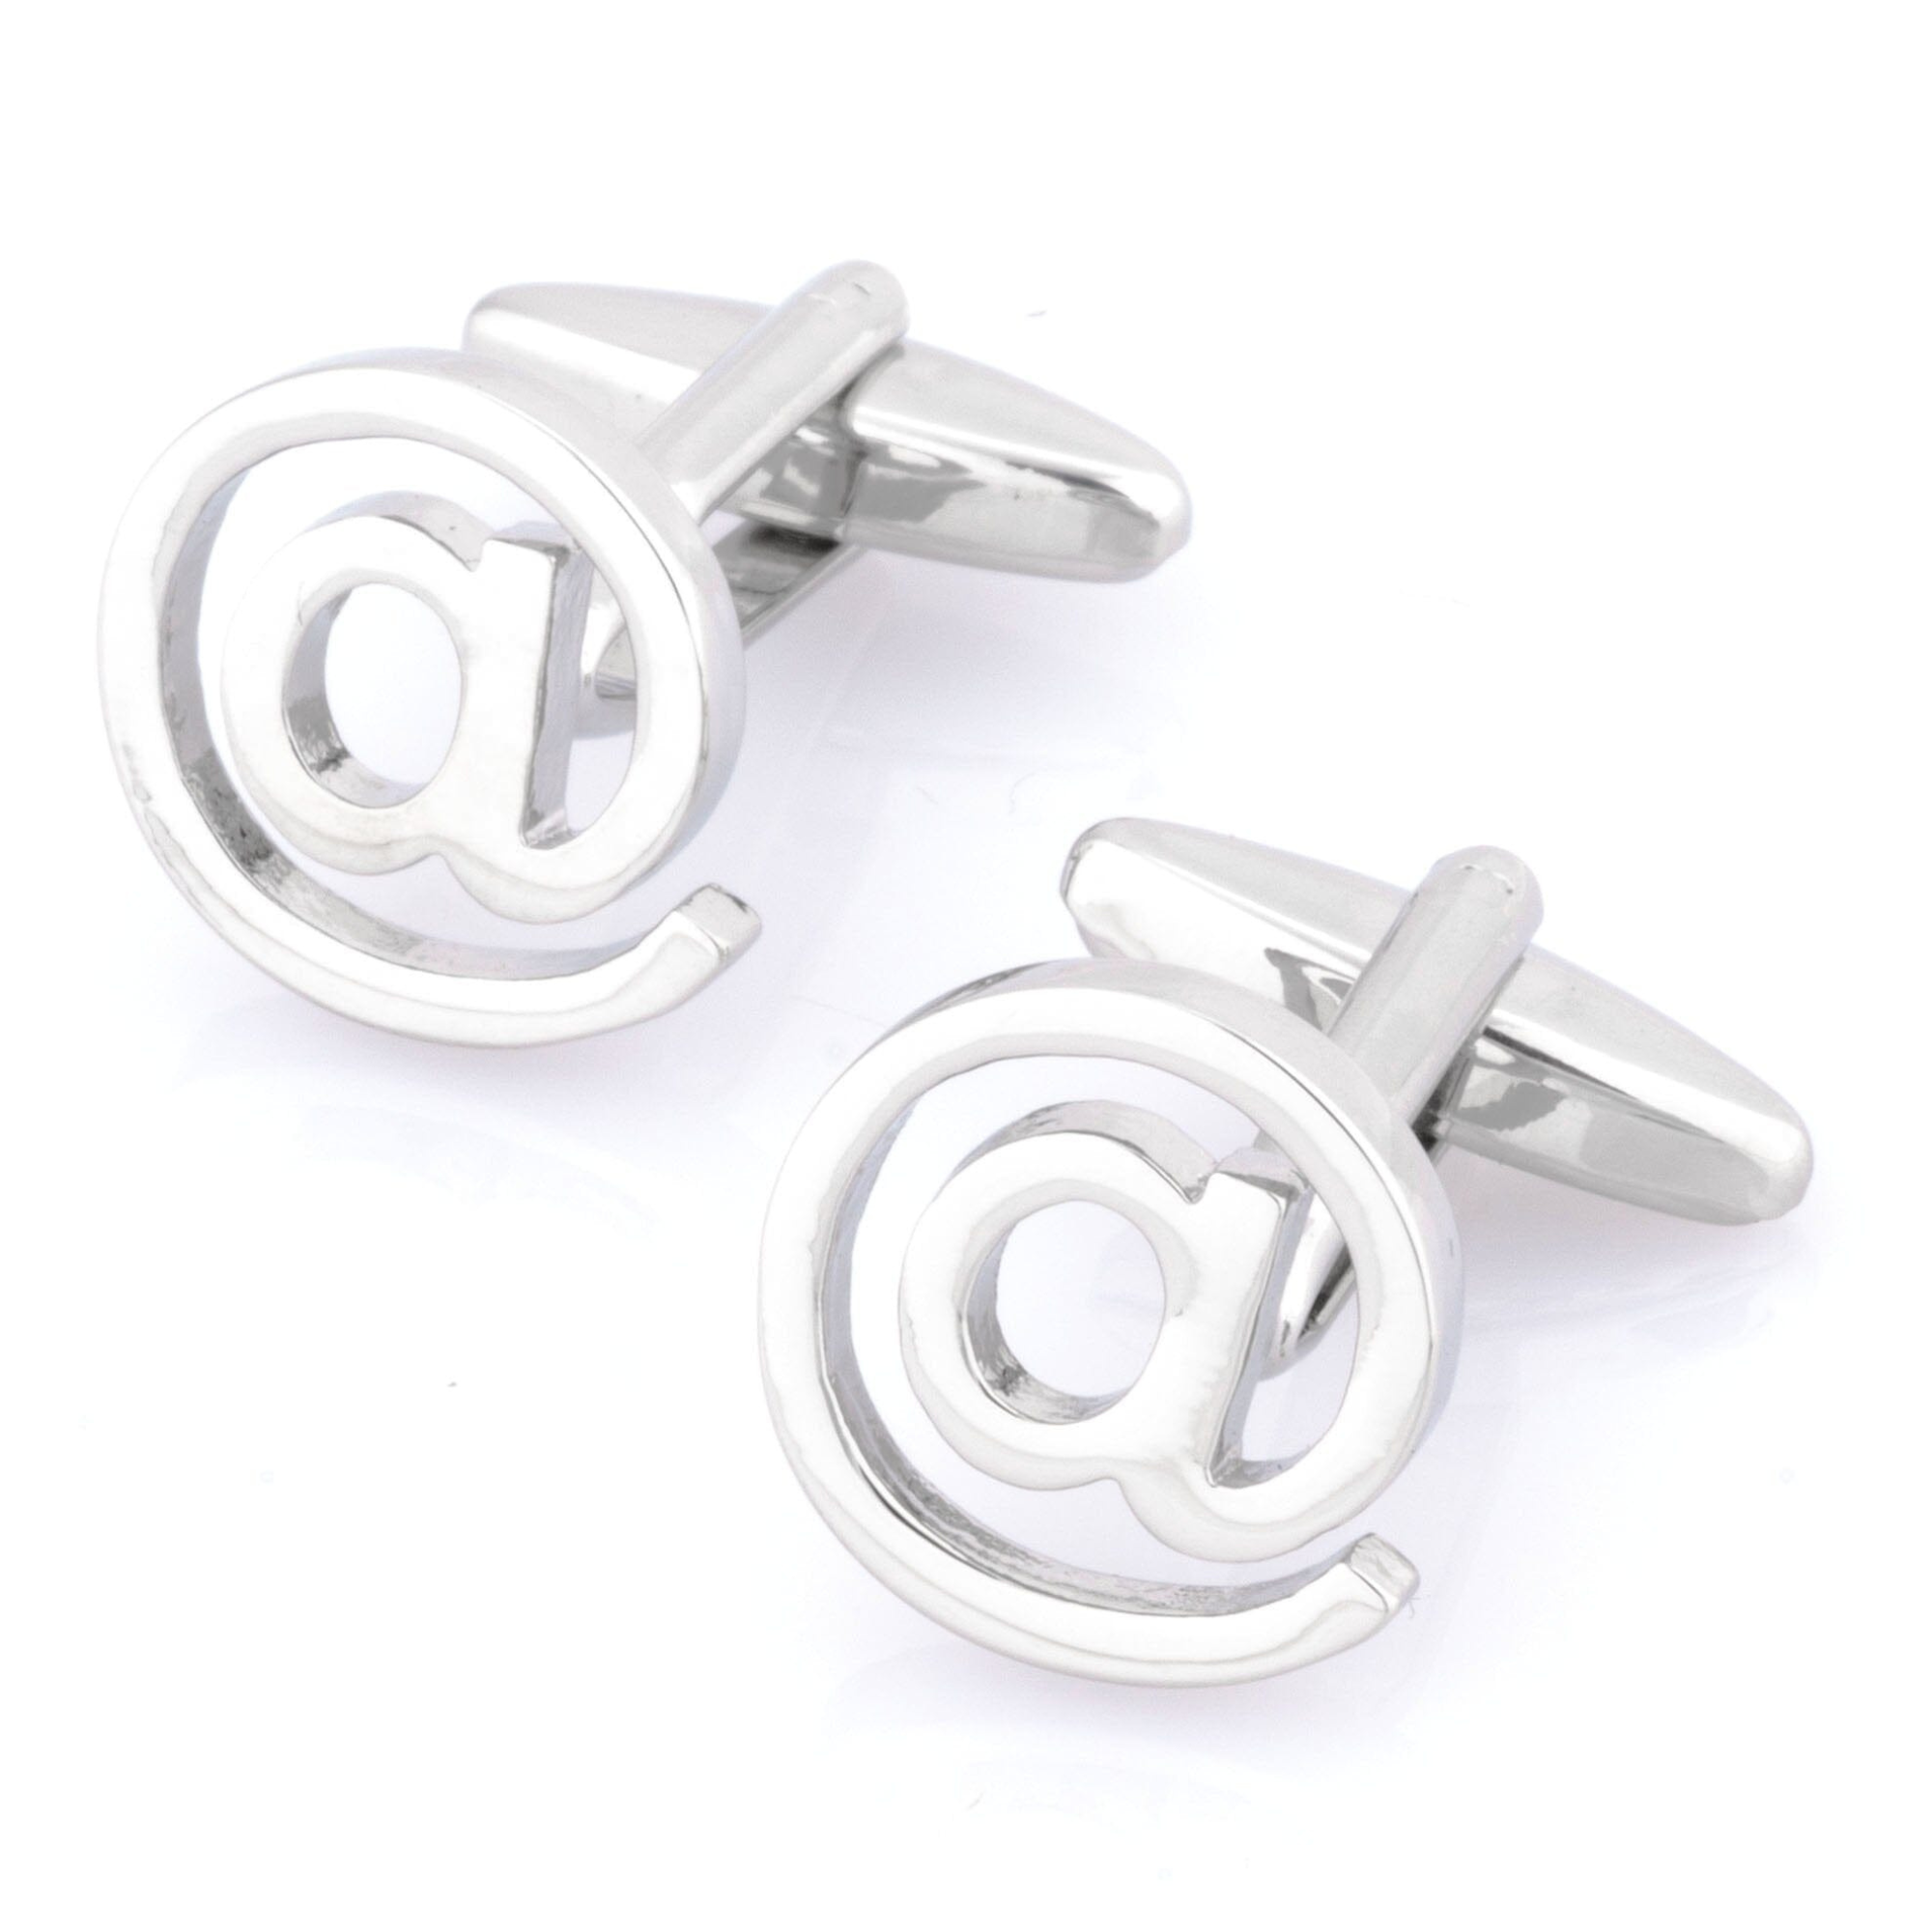 "You've Got Mail" Silver @ at Sign Cufflinks